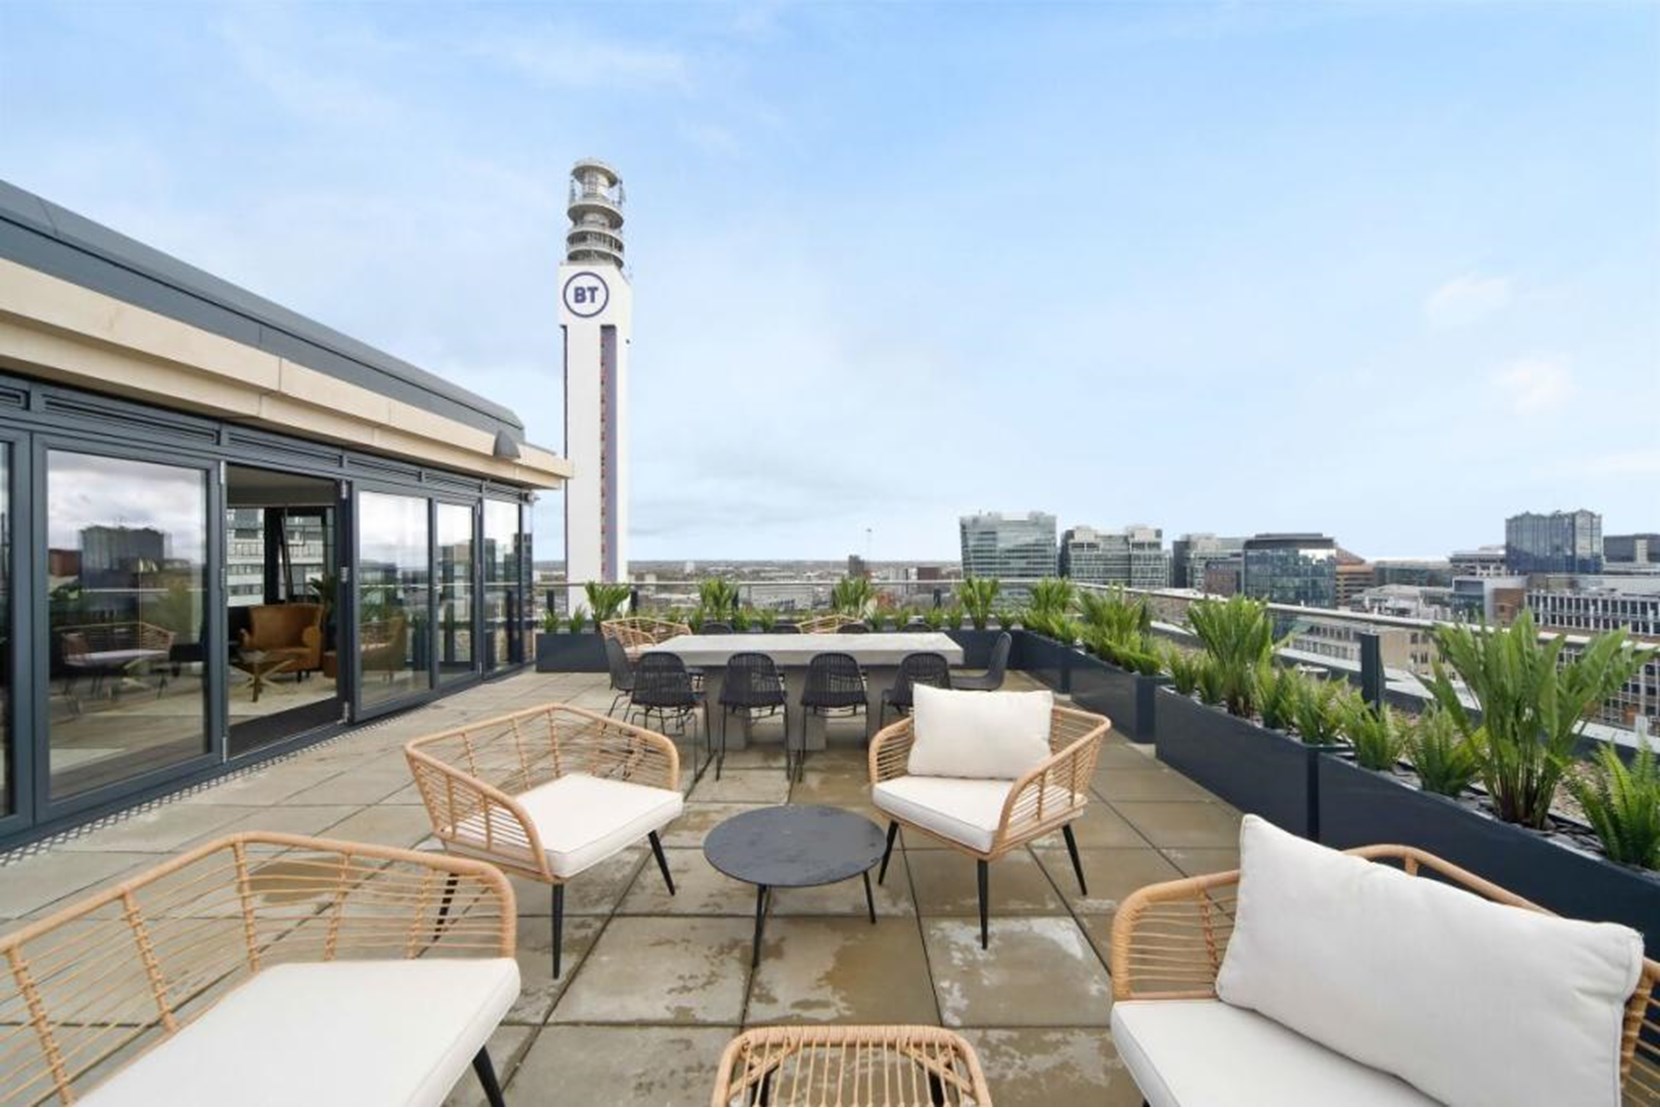 Apartments to Rent by JLL at Landrow Place, Birmingham, B3, roof top terrace